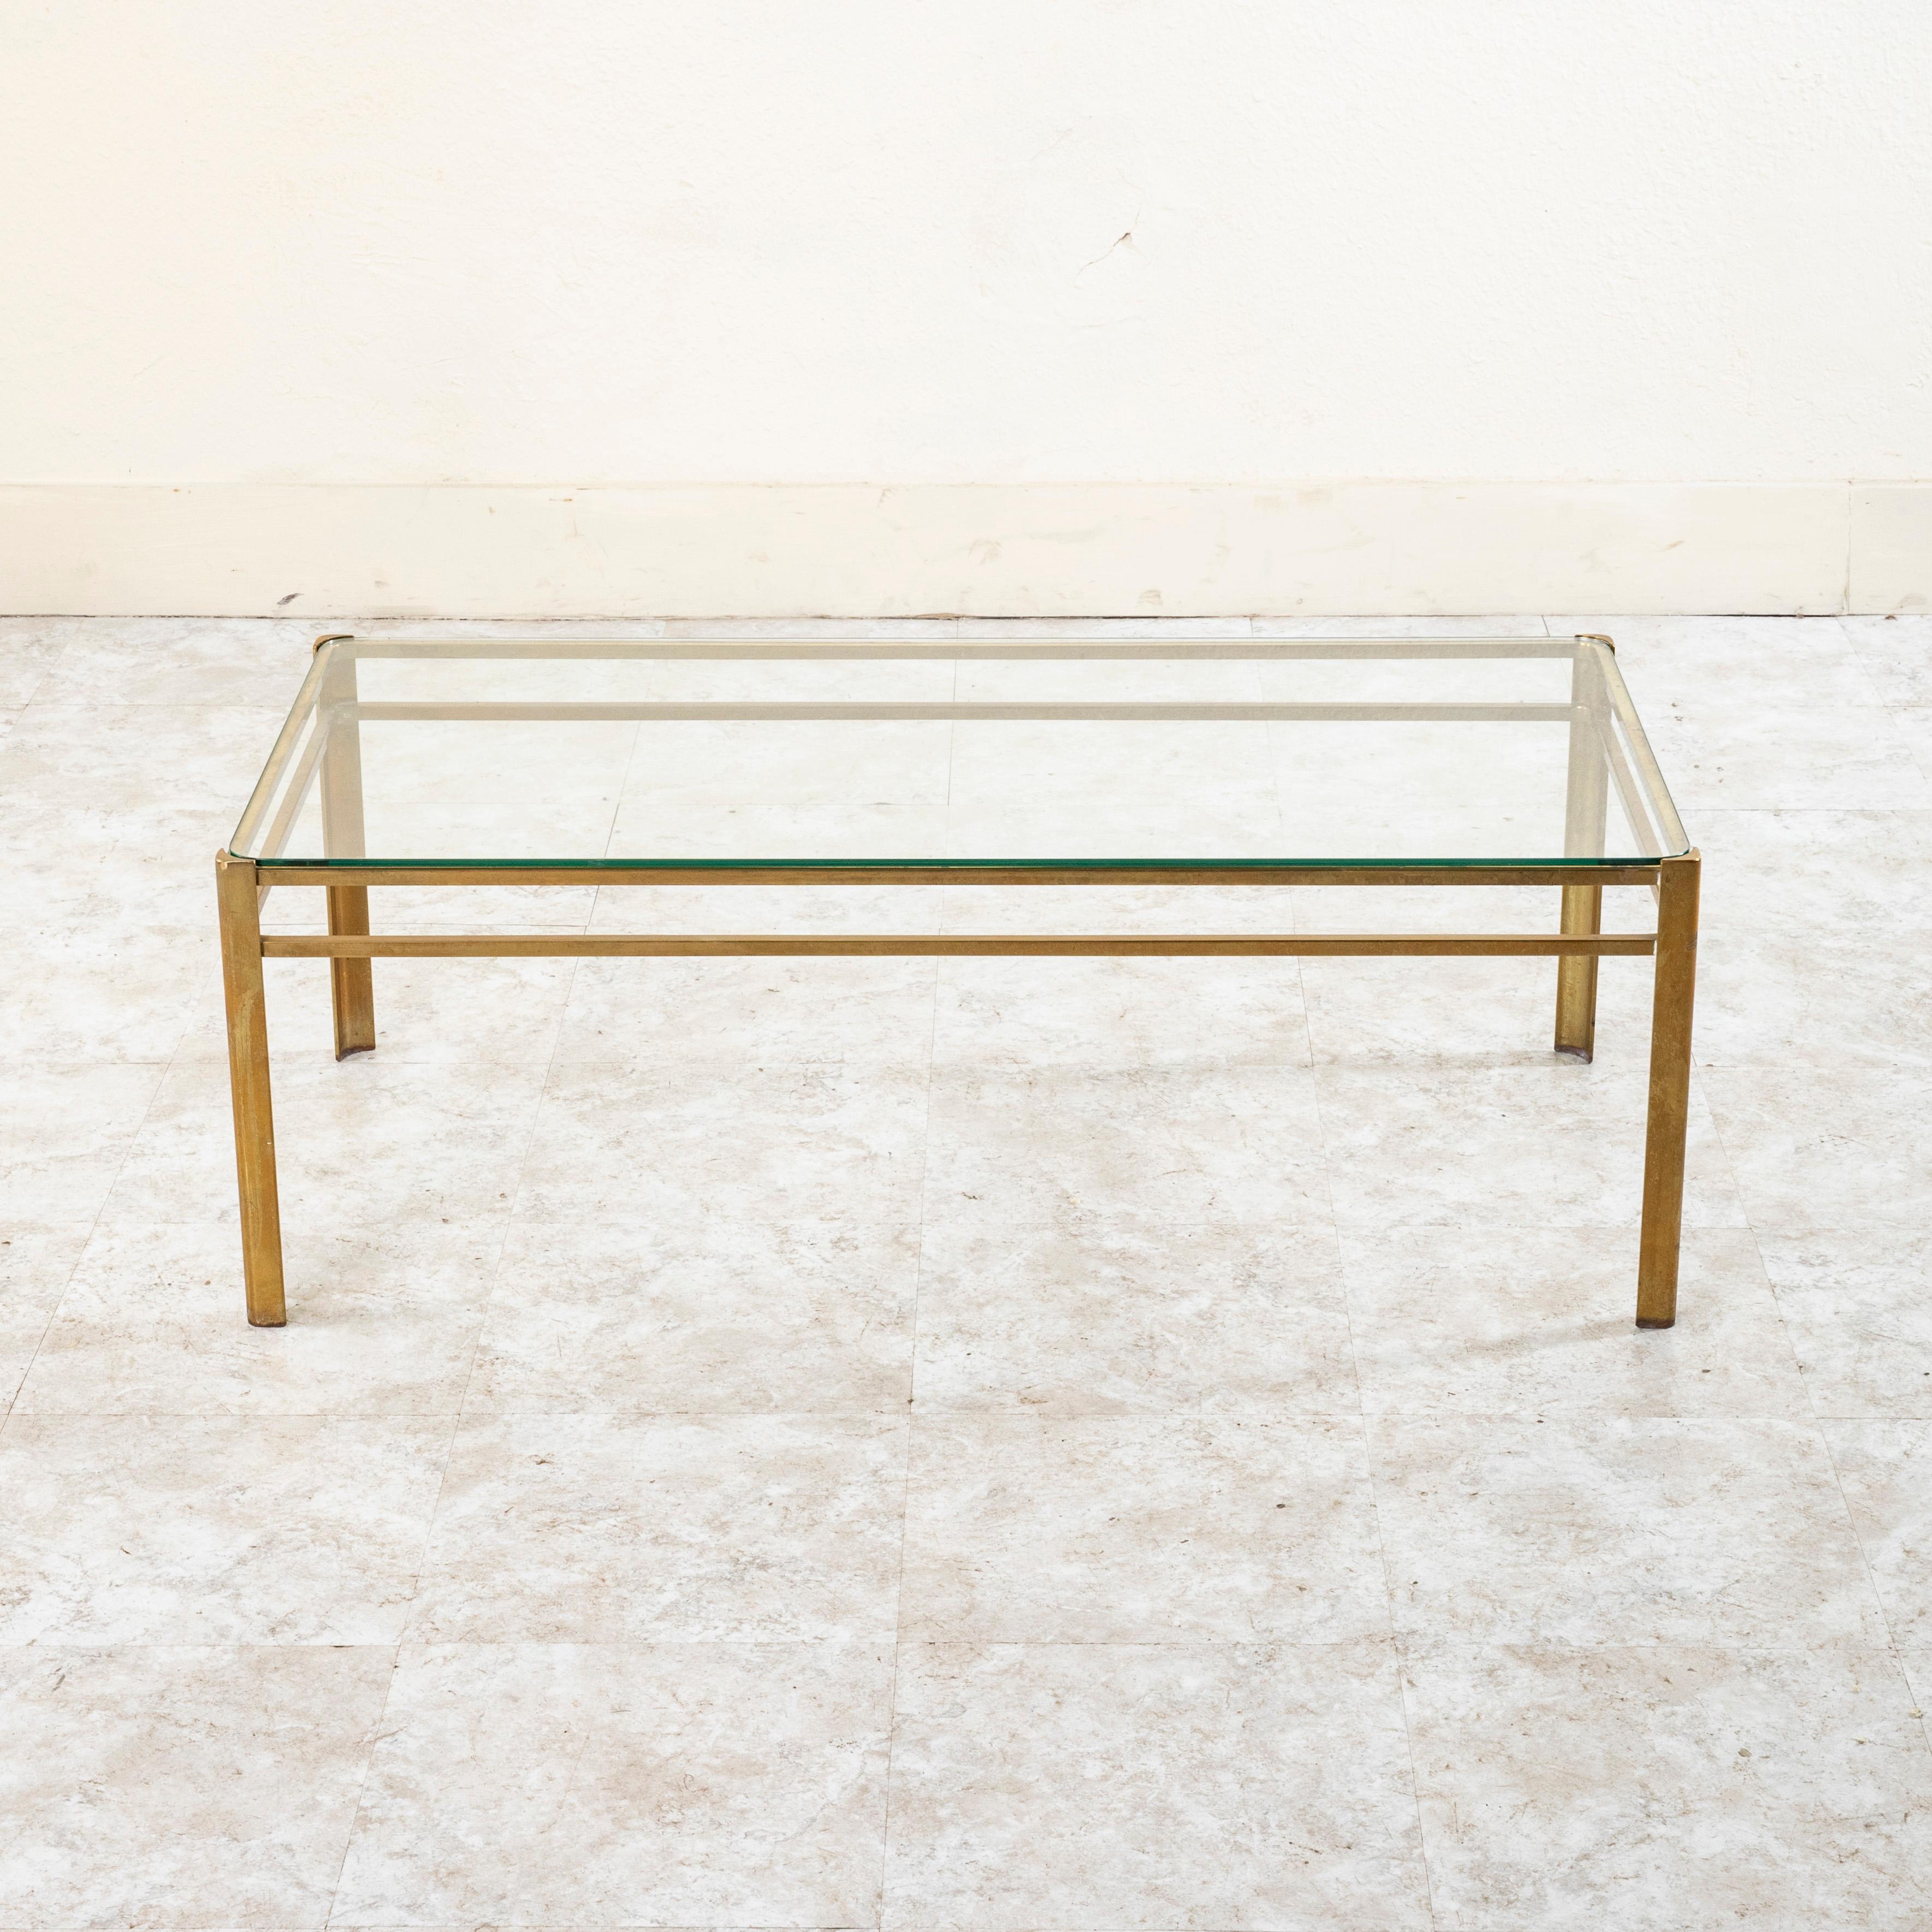 This mid-century bronze and glass coffee table or cocktail table is attributed to Jacques Quinet. The renowned twentieth century French designer drew his inspiration from the neoclassical aesthetic in architecture and interpreted it in his own